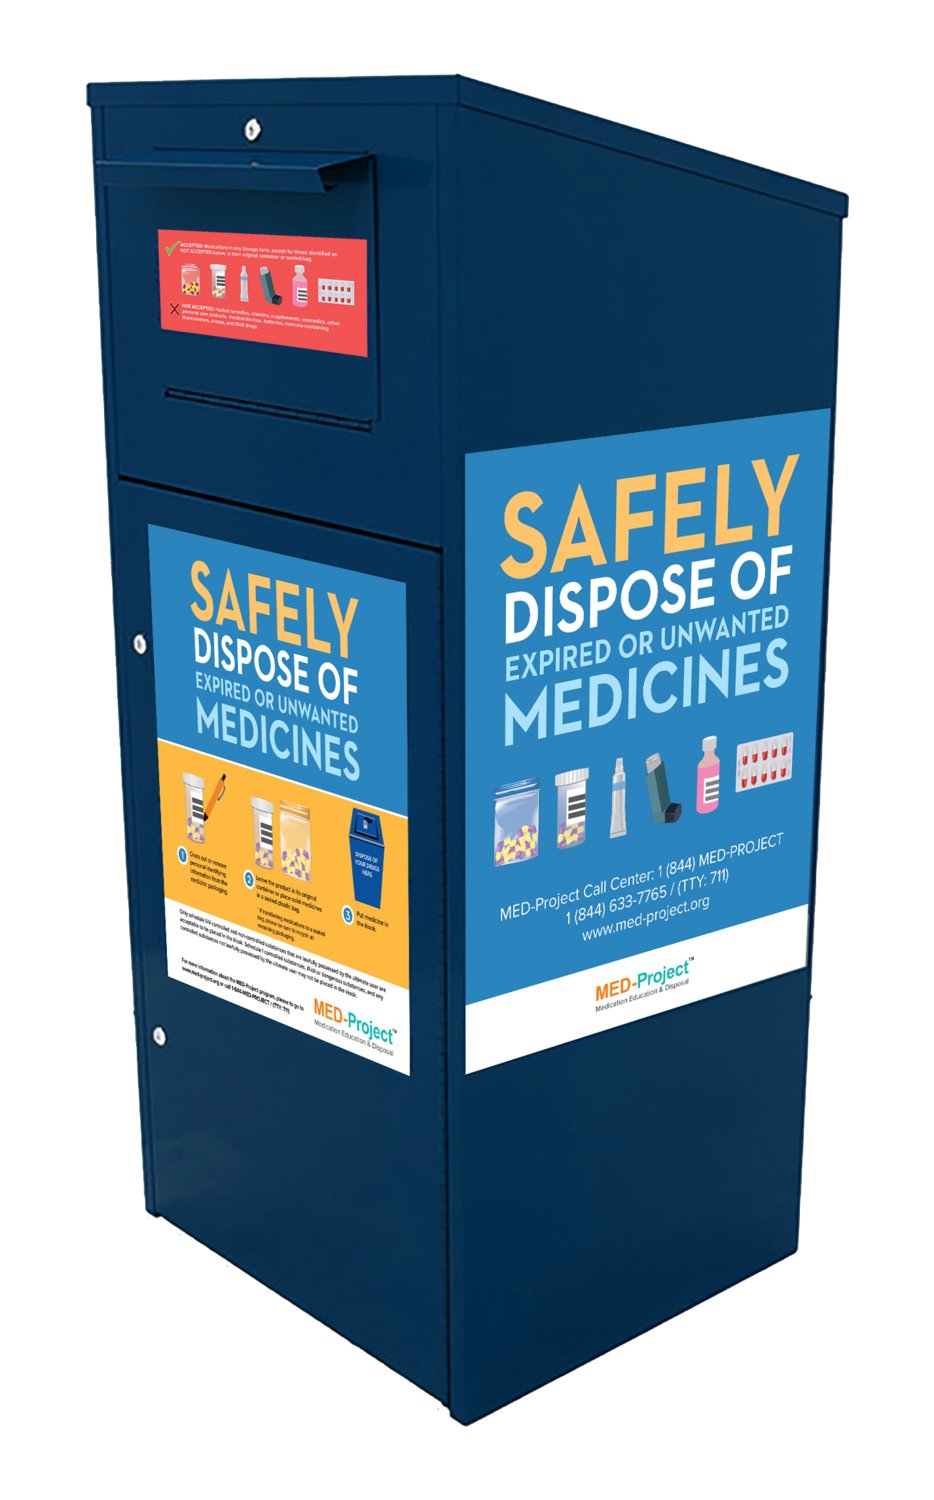 Kinney Drugs locations in New York now have a medication and drug collection kiosk, where customers can drop off their expired and unwanted medications. Local Kinney stores can be found in Boonville, Camden, Clinton, Hamilton, Ilion and Whitesboro.